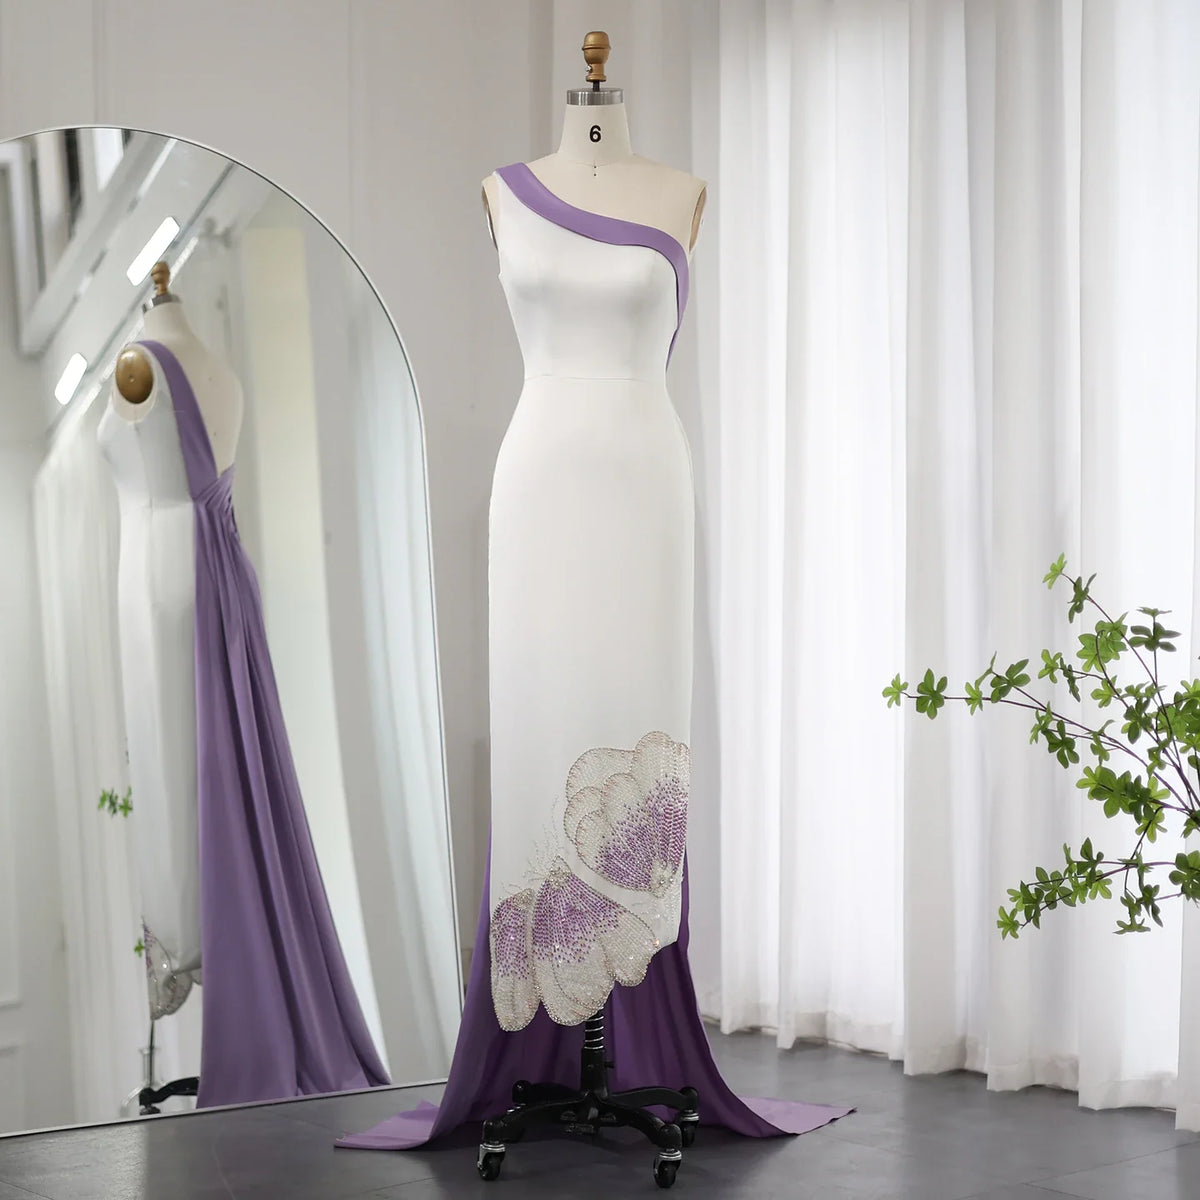 Dreamy Vow White Lilac Butterfly Luxury Evening Dresses for Women Wedding Arab One Shoulder Midi Formal Party Dress 475